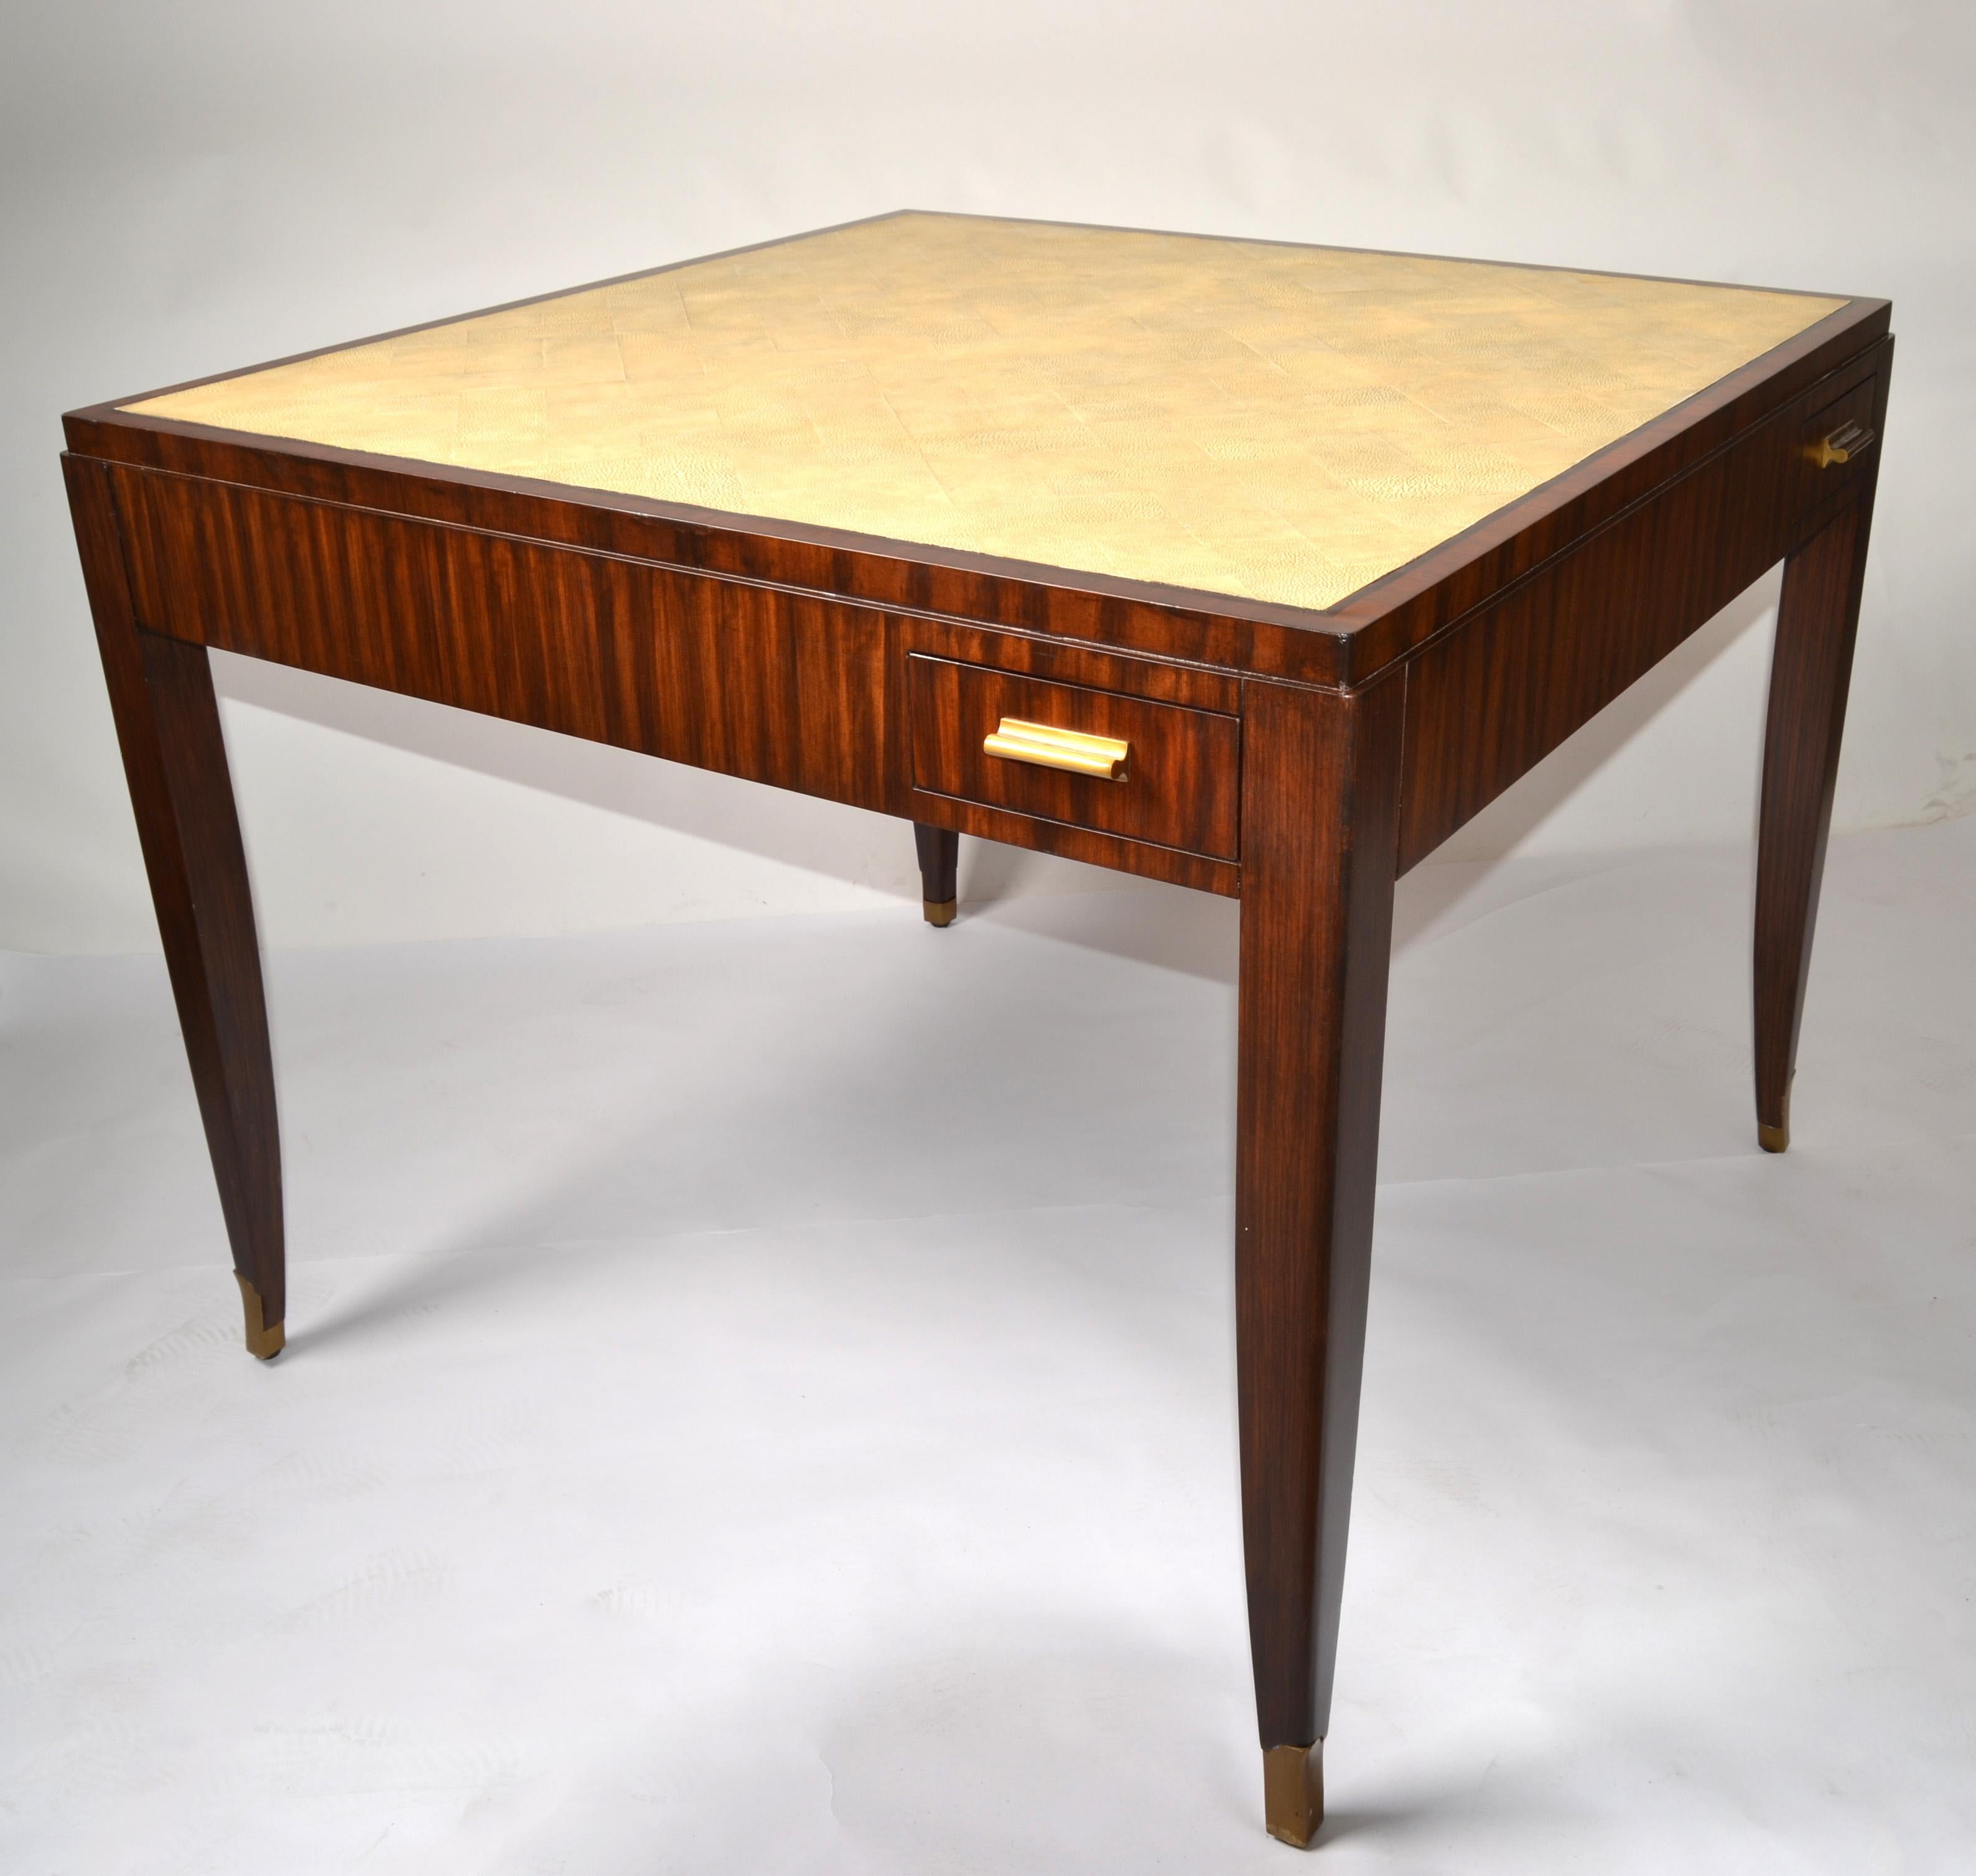 Maitland Smith handmade square Game Table in solid Macassar Wood with Shagreen Top, Bronze Pulls and cupholders inside the four drawers. 
Unique and rare Game Table made in the Philippines in the 1990s.
Fully restored and in good vintage condition